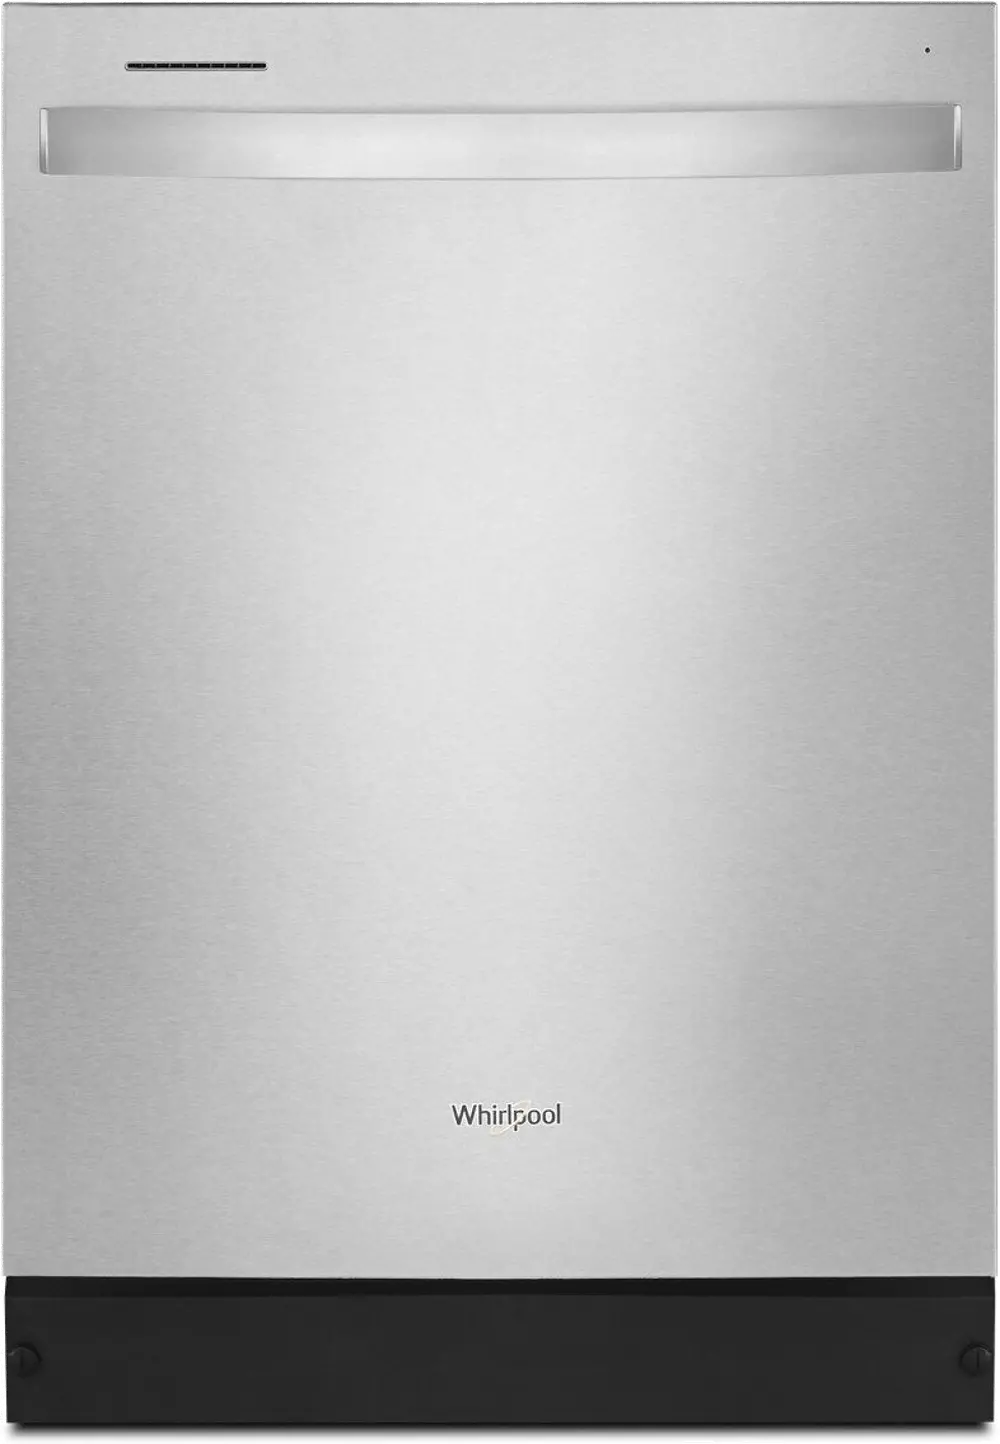 WDT540HAMZ Whirlpool Top Control Dishwasher - Stainless Steel-1